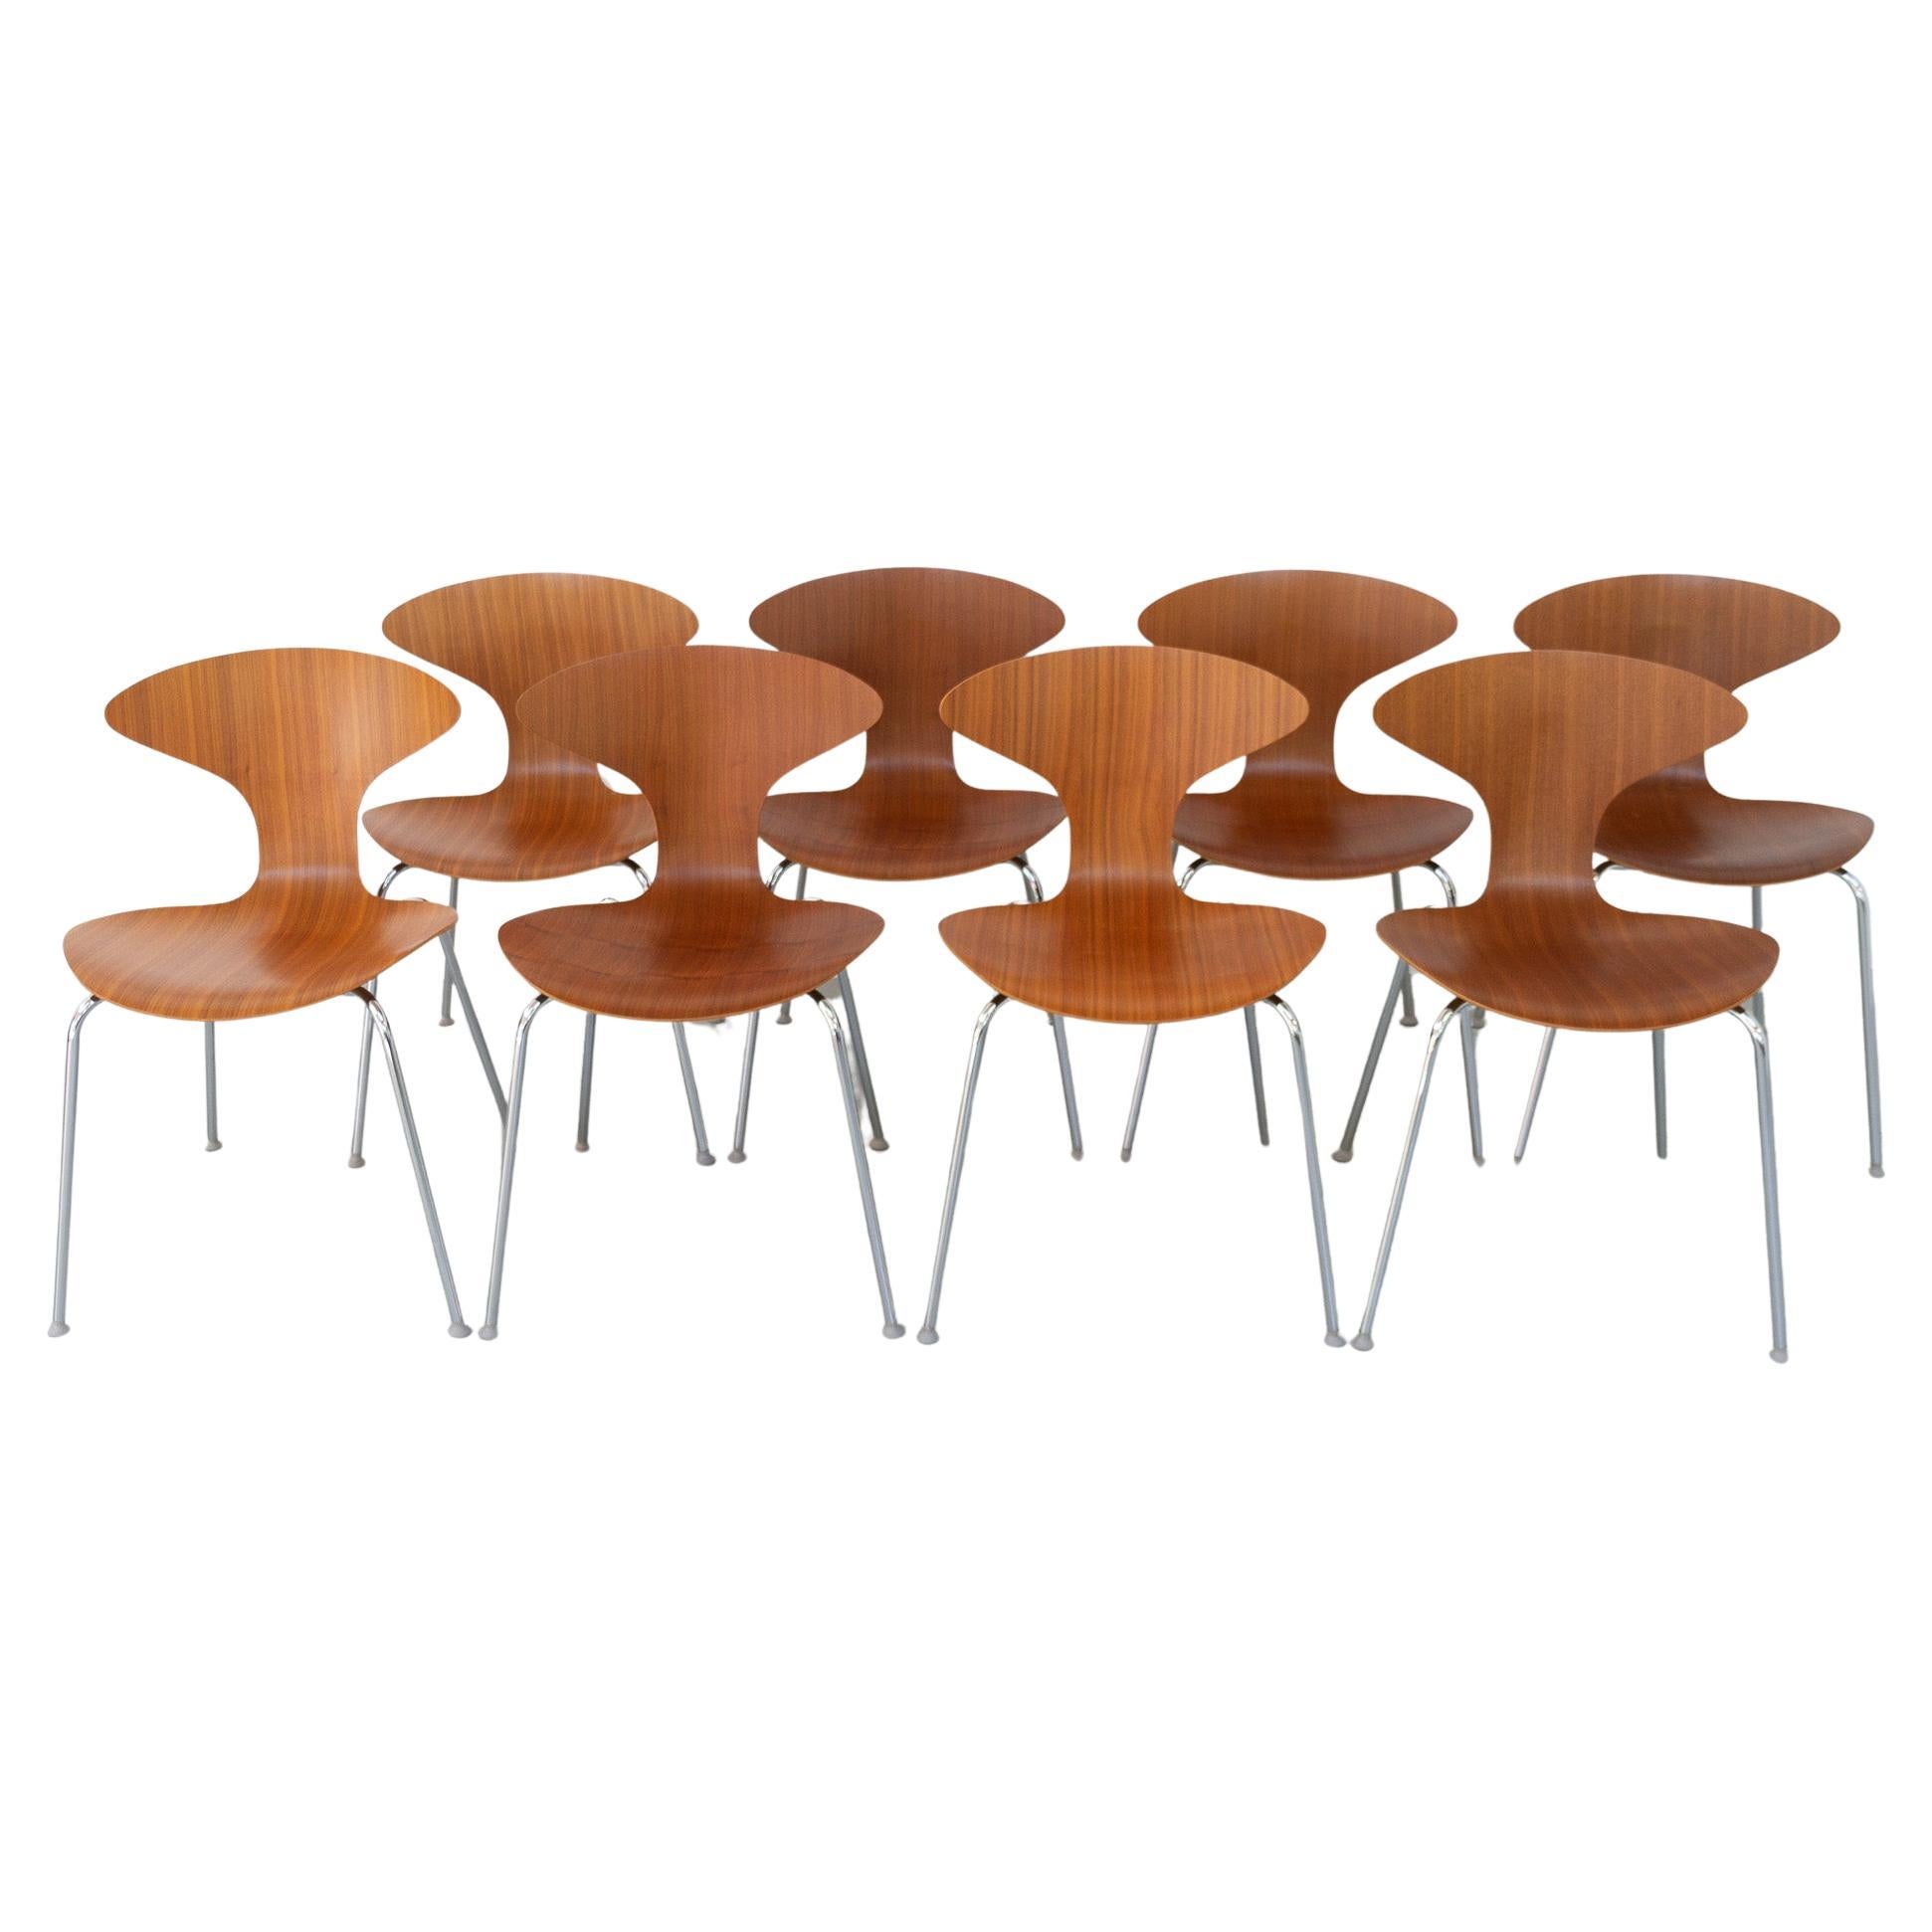 Walnut Orbit Dining Chairs by Ross Lovegrove for Bernhardt Design, Set of 8 For Sale